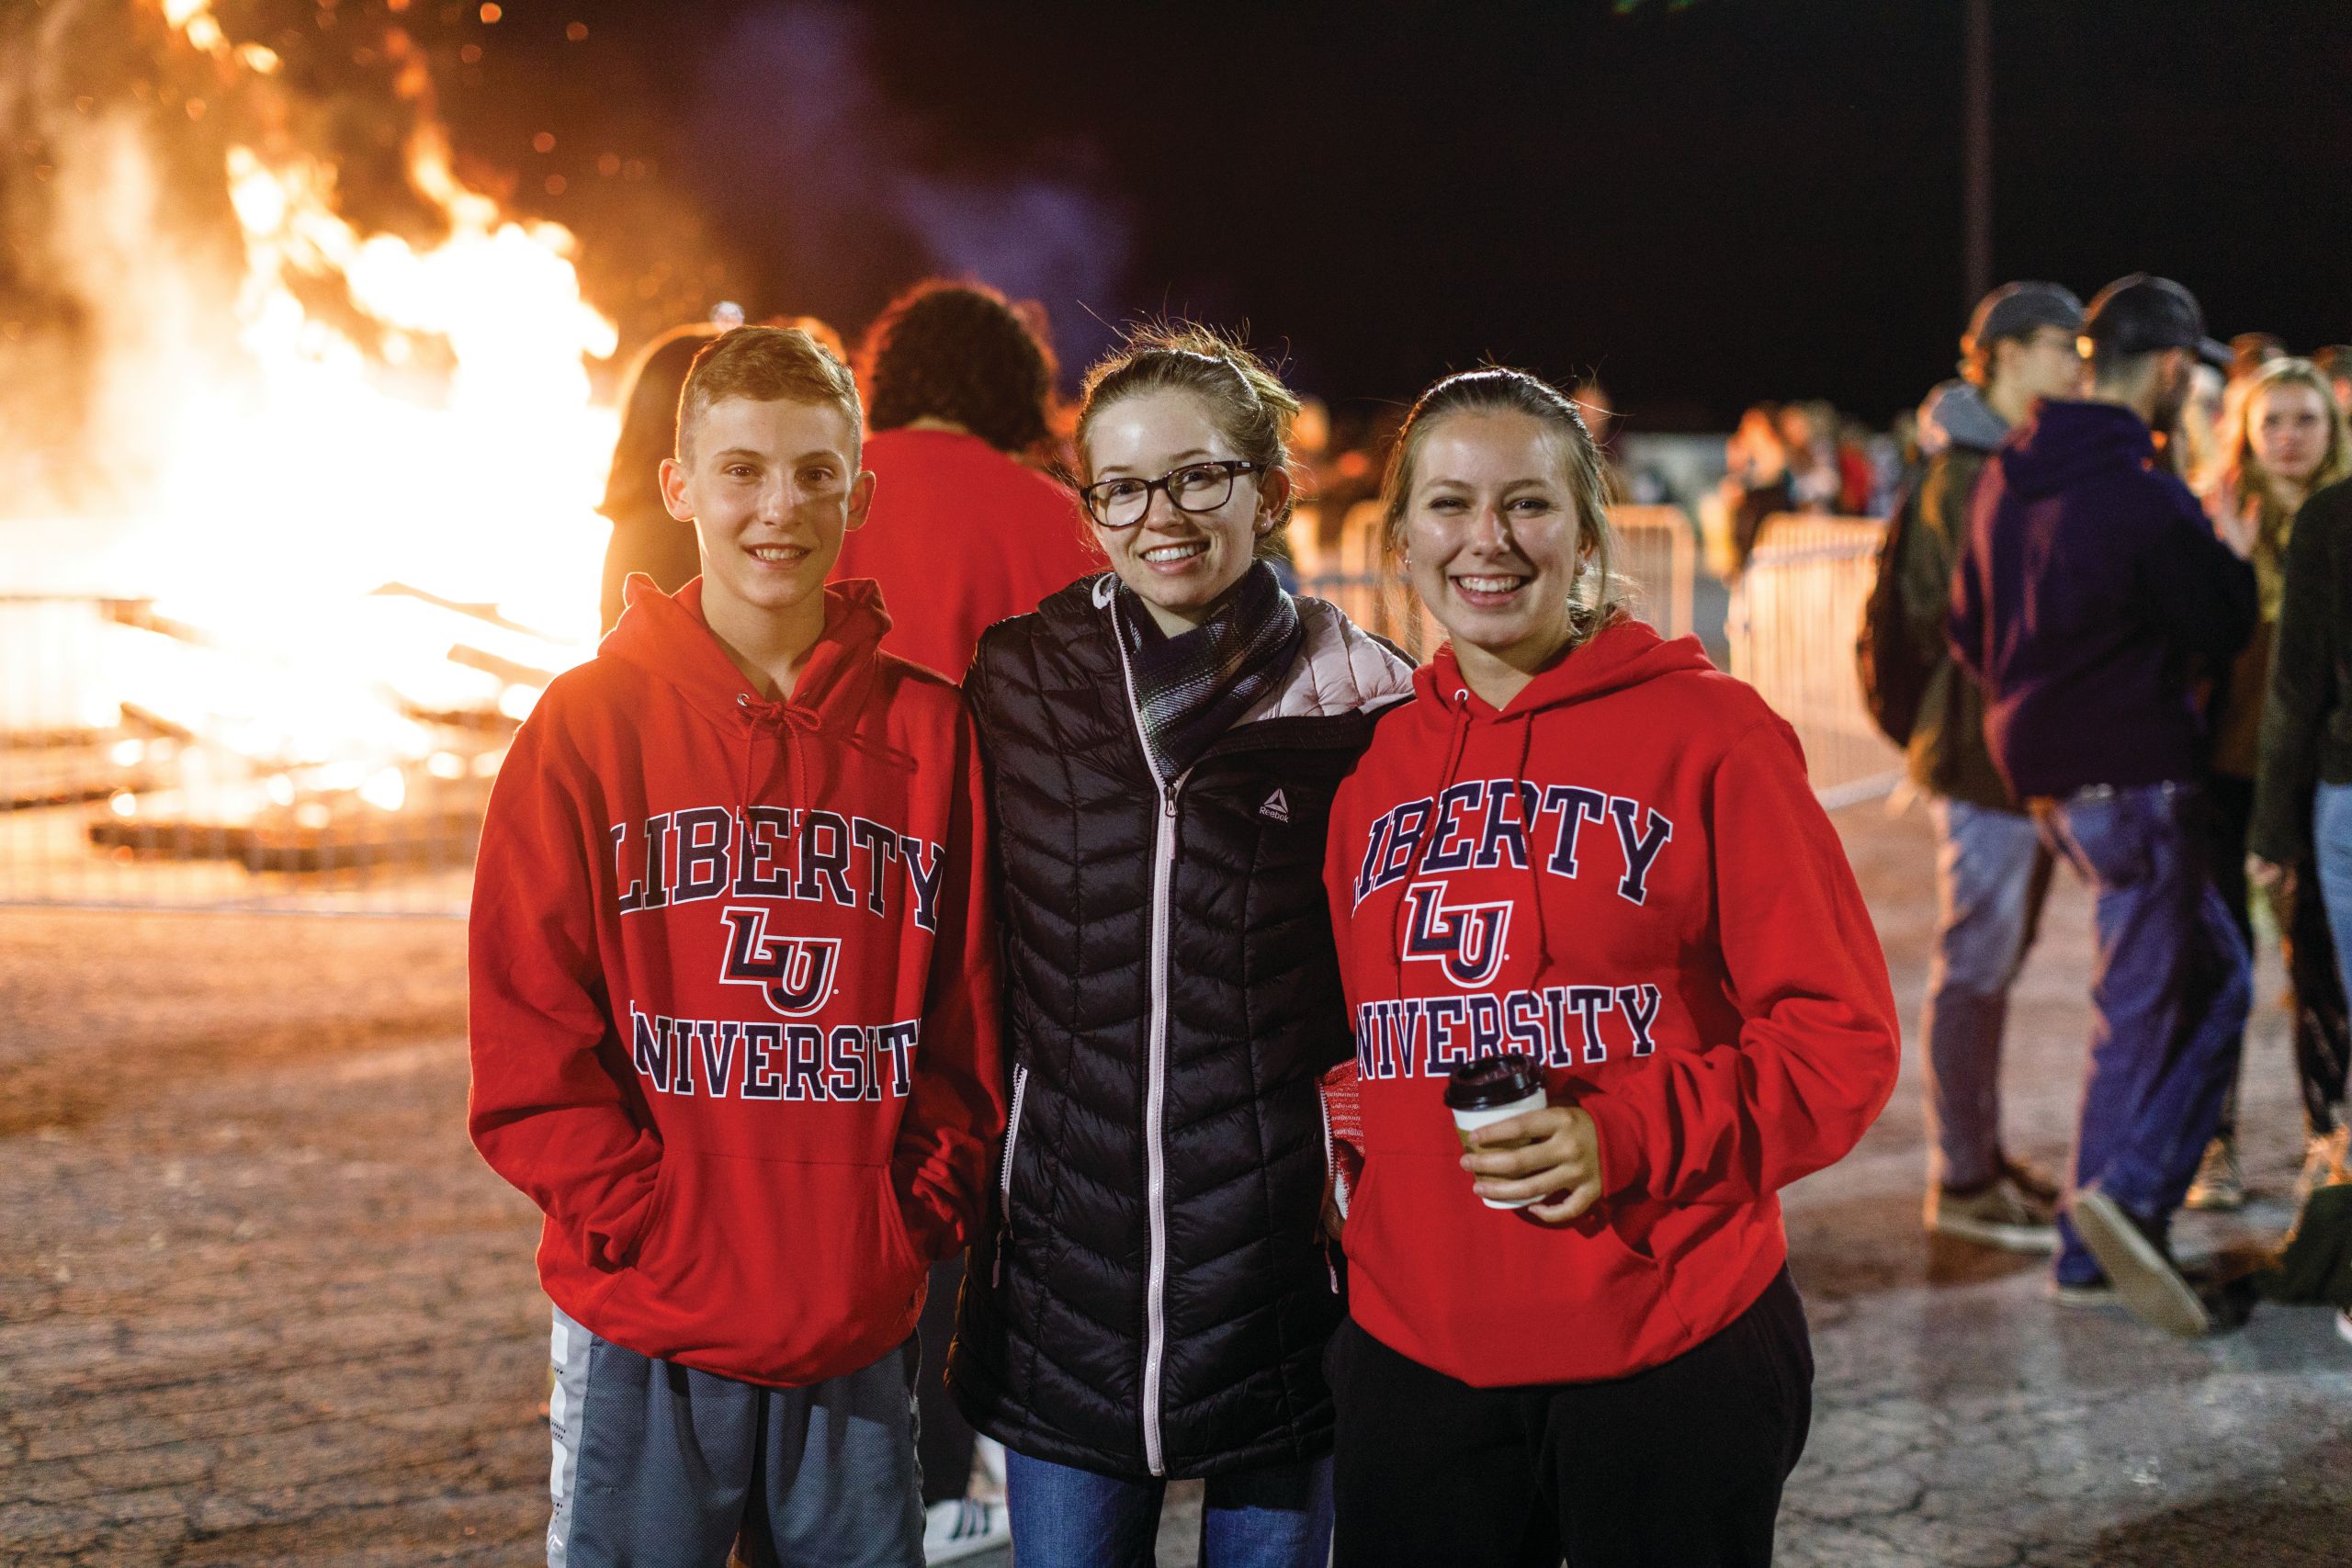 The Homecoming Bonfire Is Photographed On October 18, 2019. (Photo By KJ Jugar)